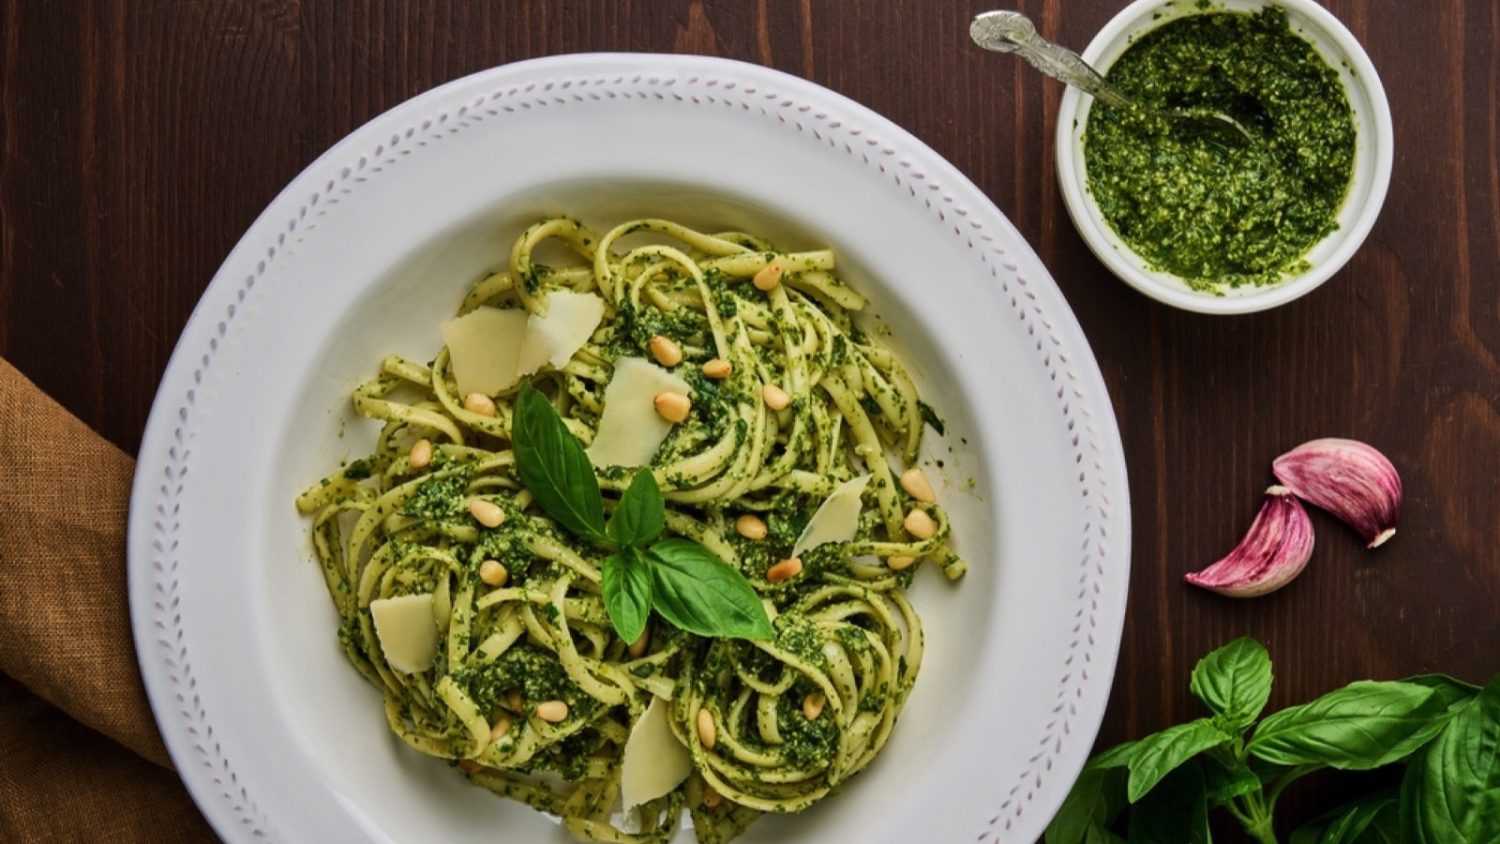 Classic italian pasta pesto with pine nuts, pound garlic, basil leaves, hard parmesan cheese and extra-virgin olive oil. Mediterranean pesto sauce and tagliatelle. Healthy homemade vegetarian